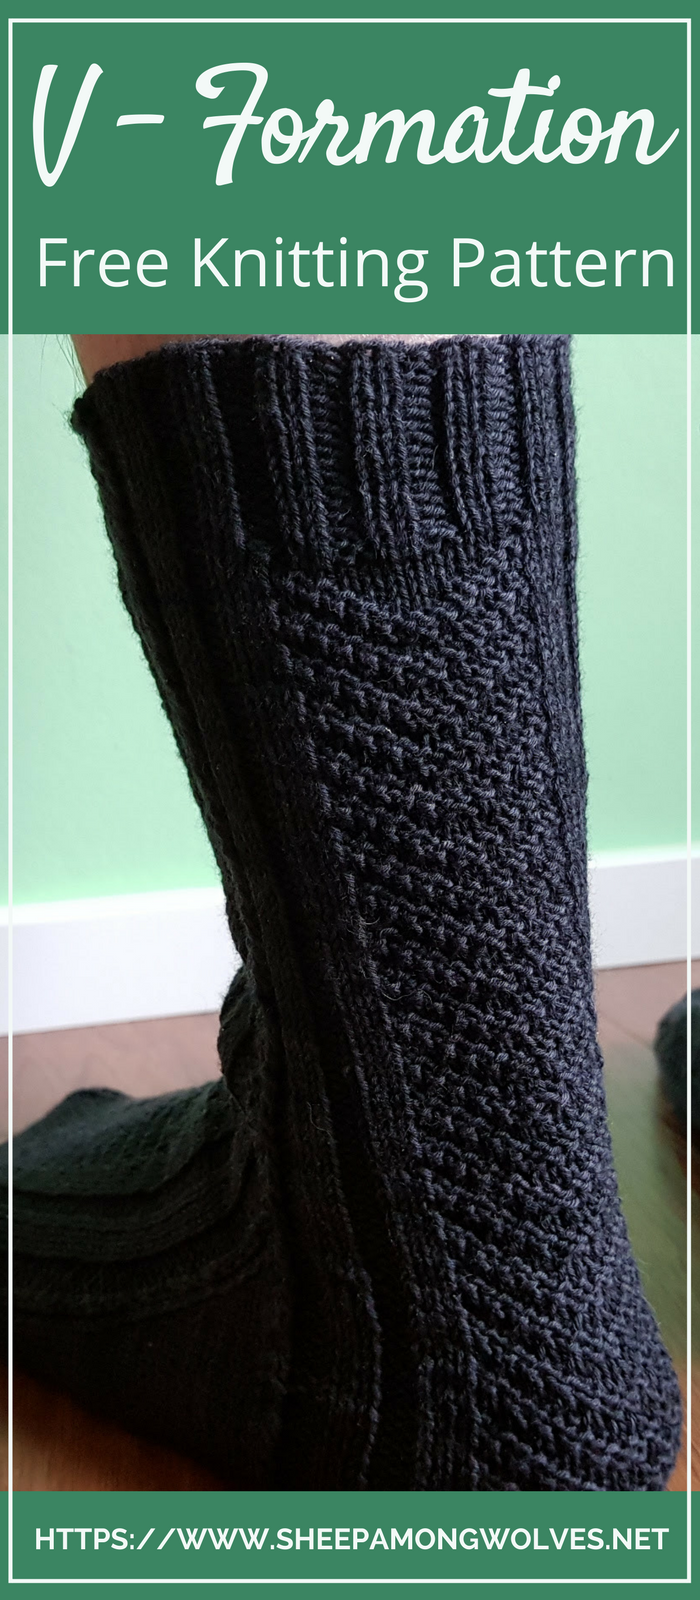 Free sock knitting pattern by Nadja Senoucci. Ravelry link included in the blog post. Click here to get the pattern!